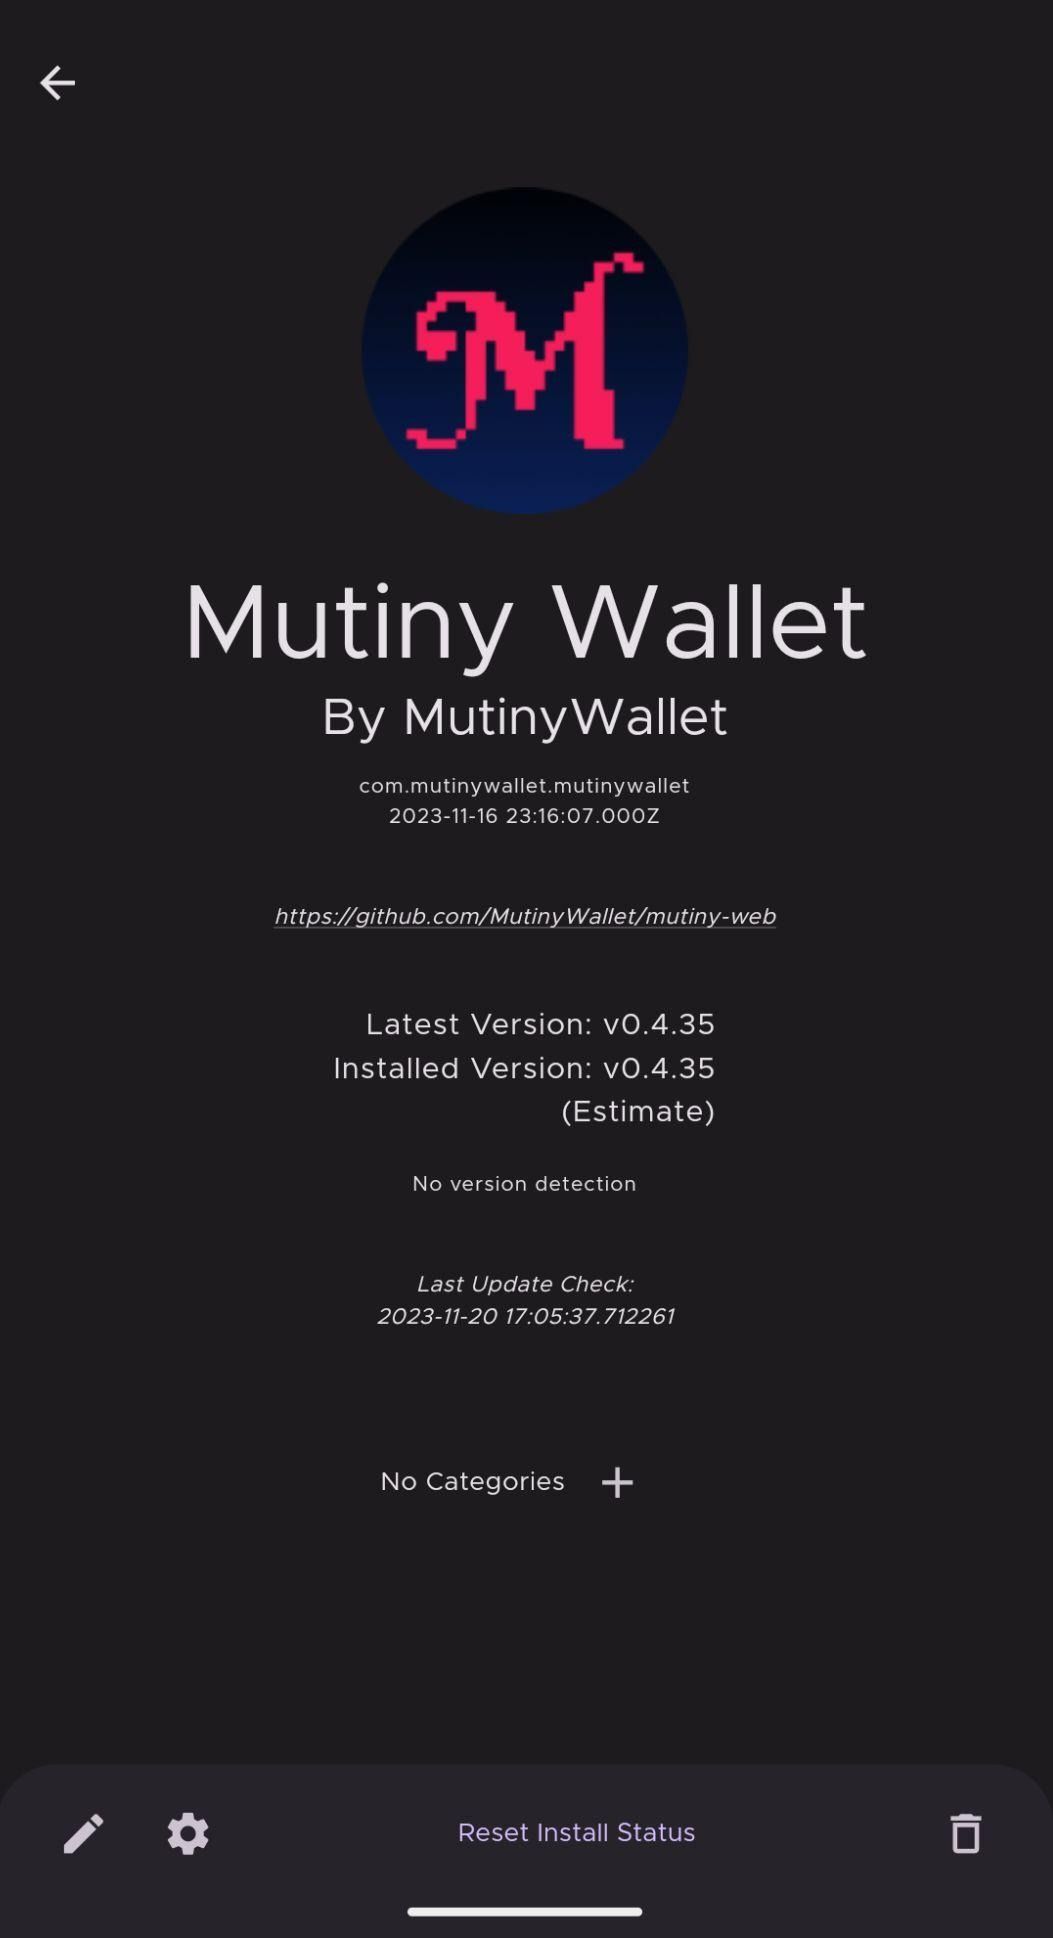 How to Migrate Mutiny Wallet to the Native Apps